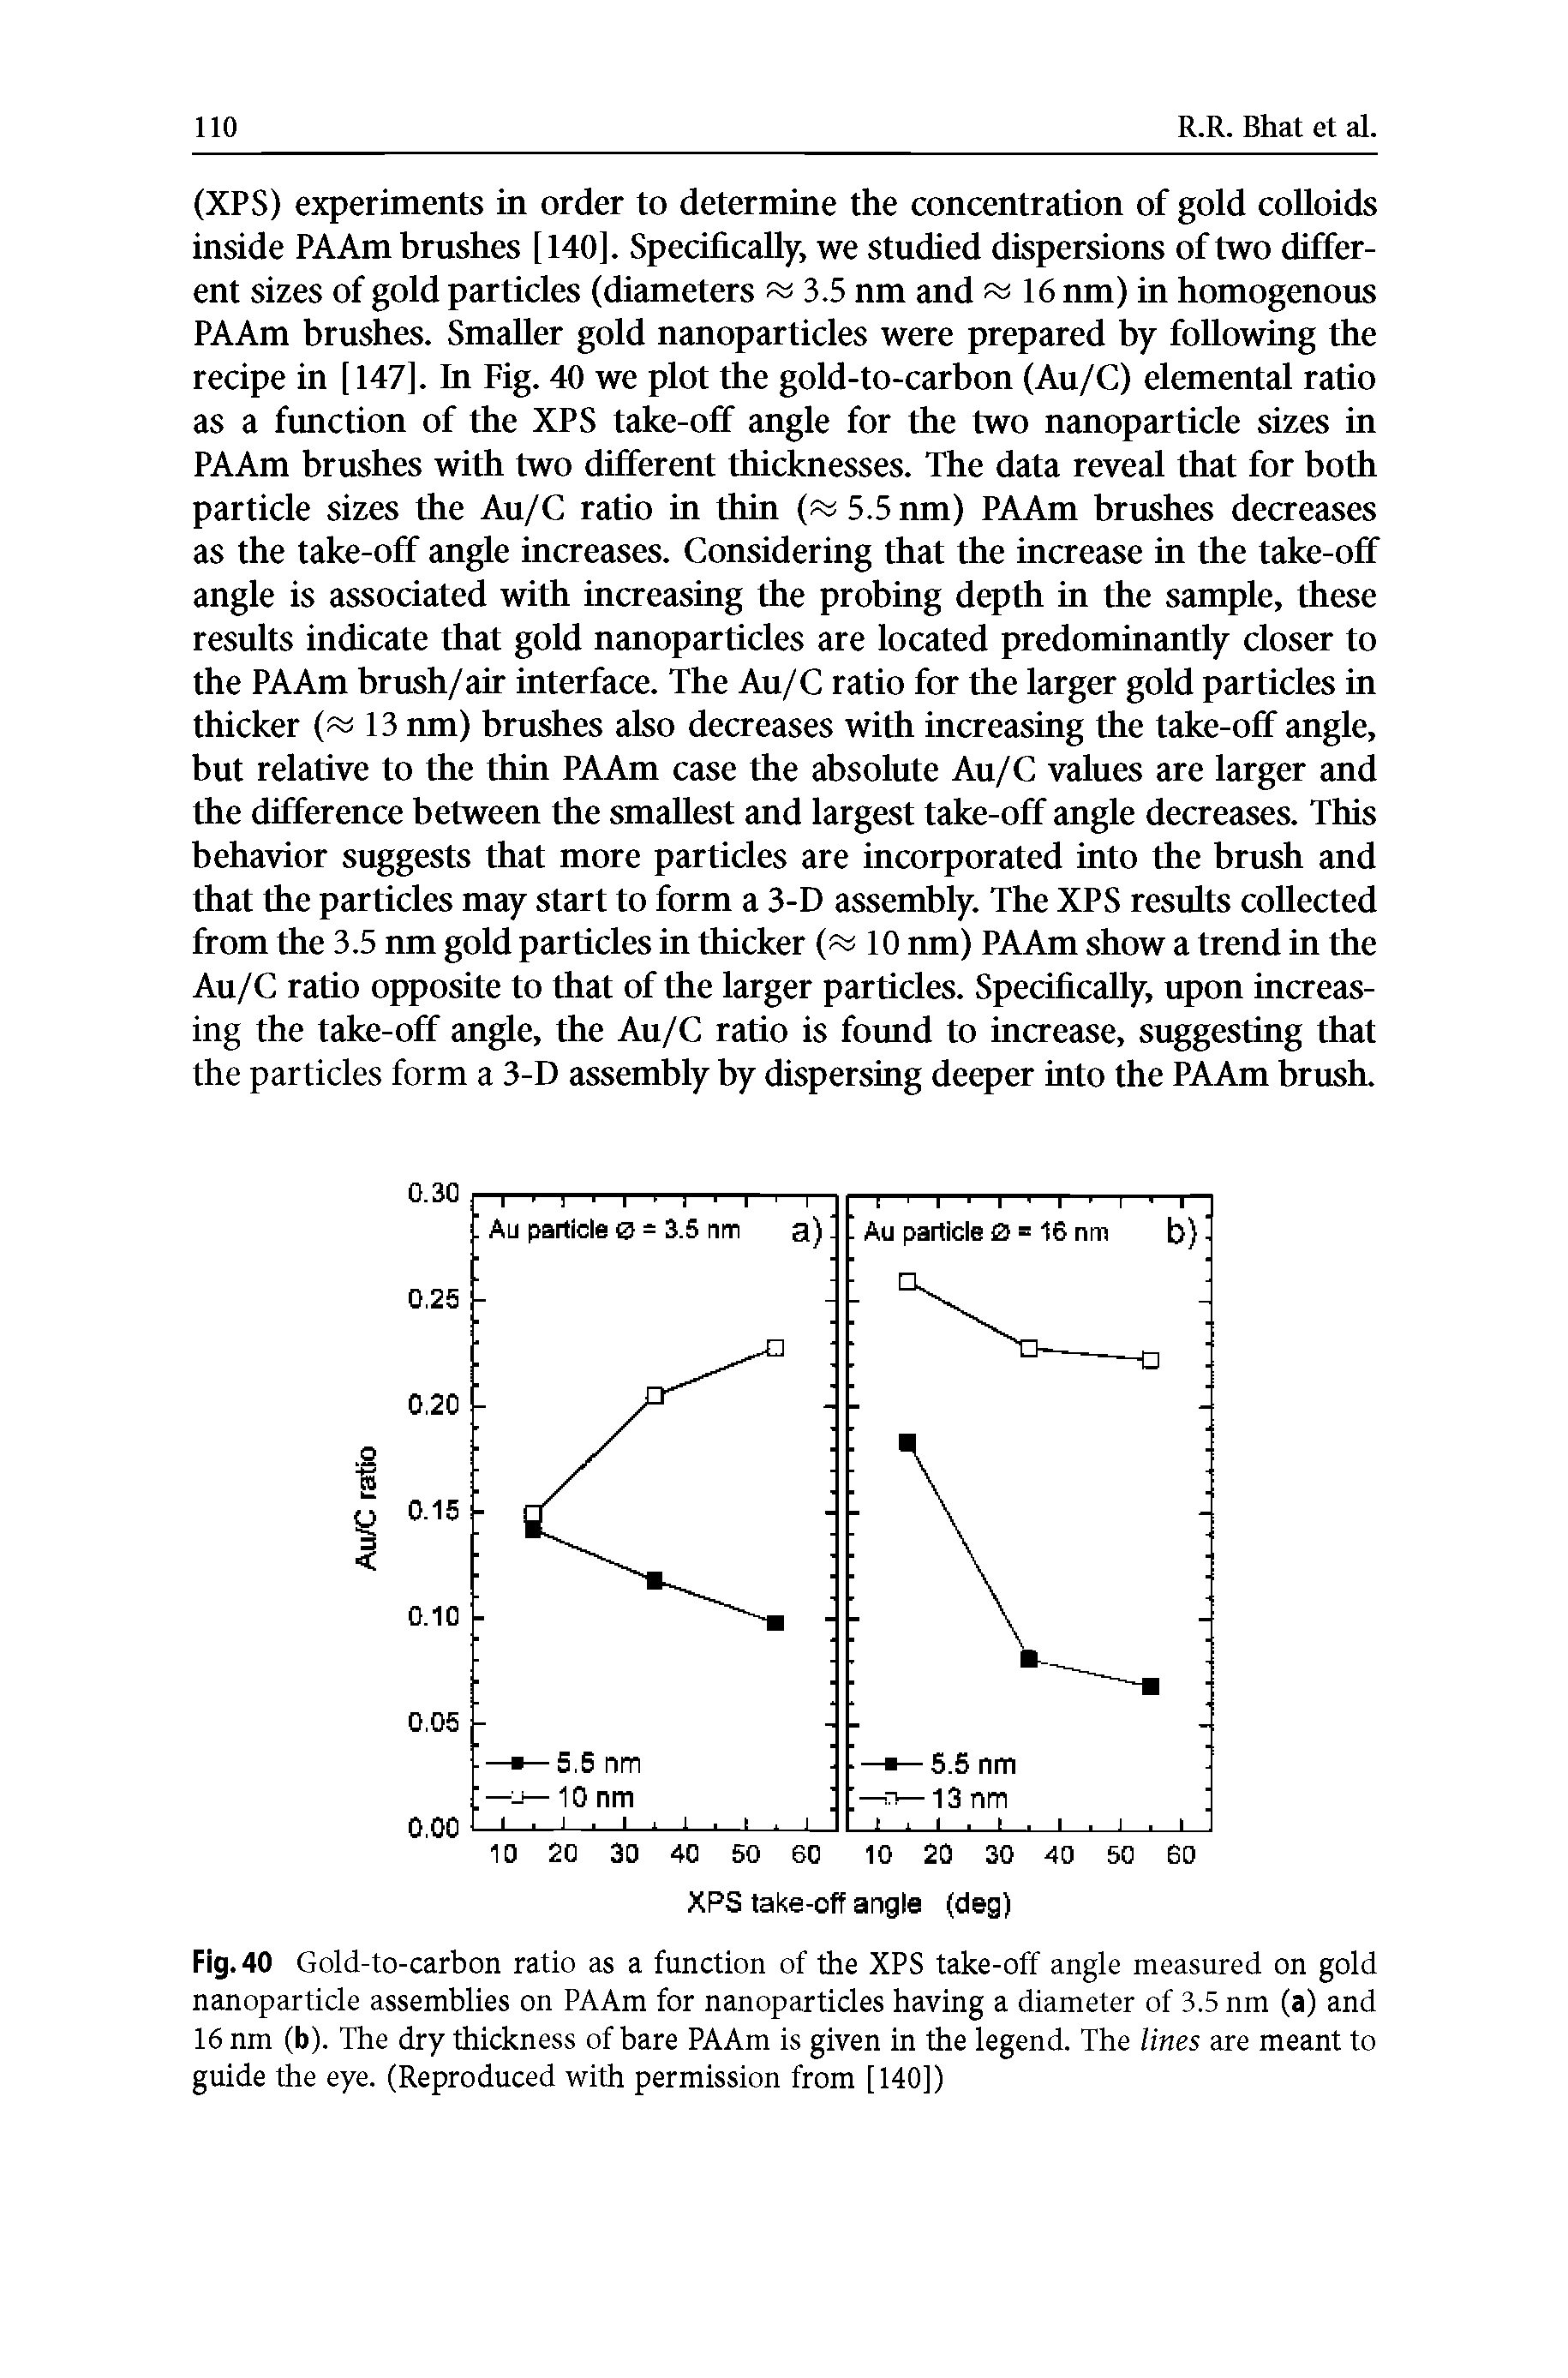 Fig. 40 Gold-to-carbon ratio as a function of the XPS take-off angle measured on gold nanoparticle assemblies on PAAm for nanoparticles having a diameter of 3.5 nm (a) and 16 nm (b). The dry thickness of bare PAAm is given in the legend. The lines are meant to guide the eye. (Reproduced with permission from [140])...